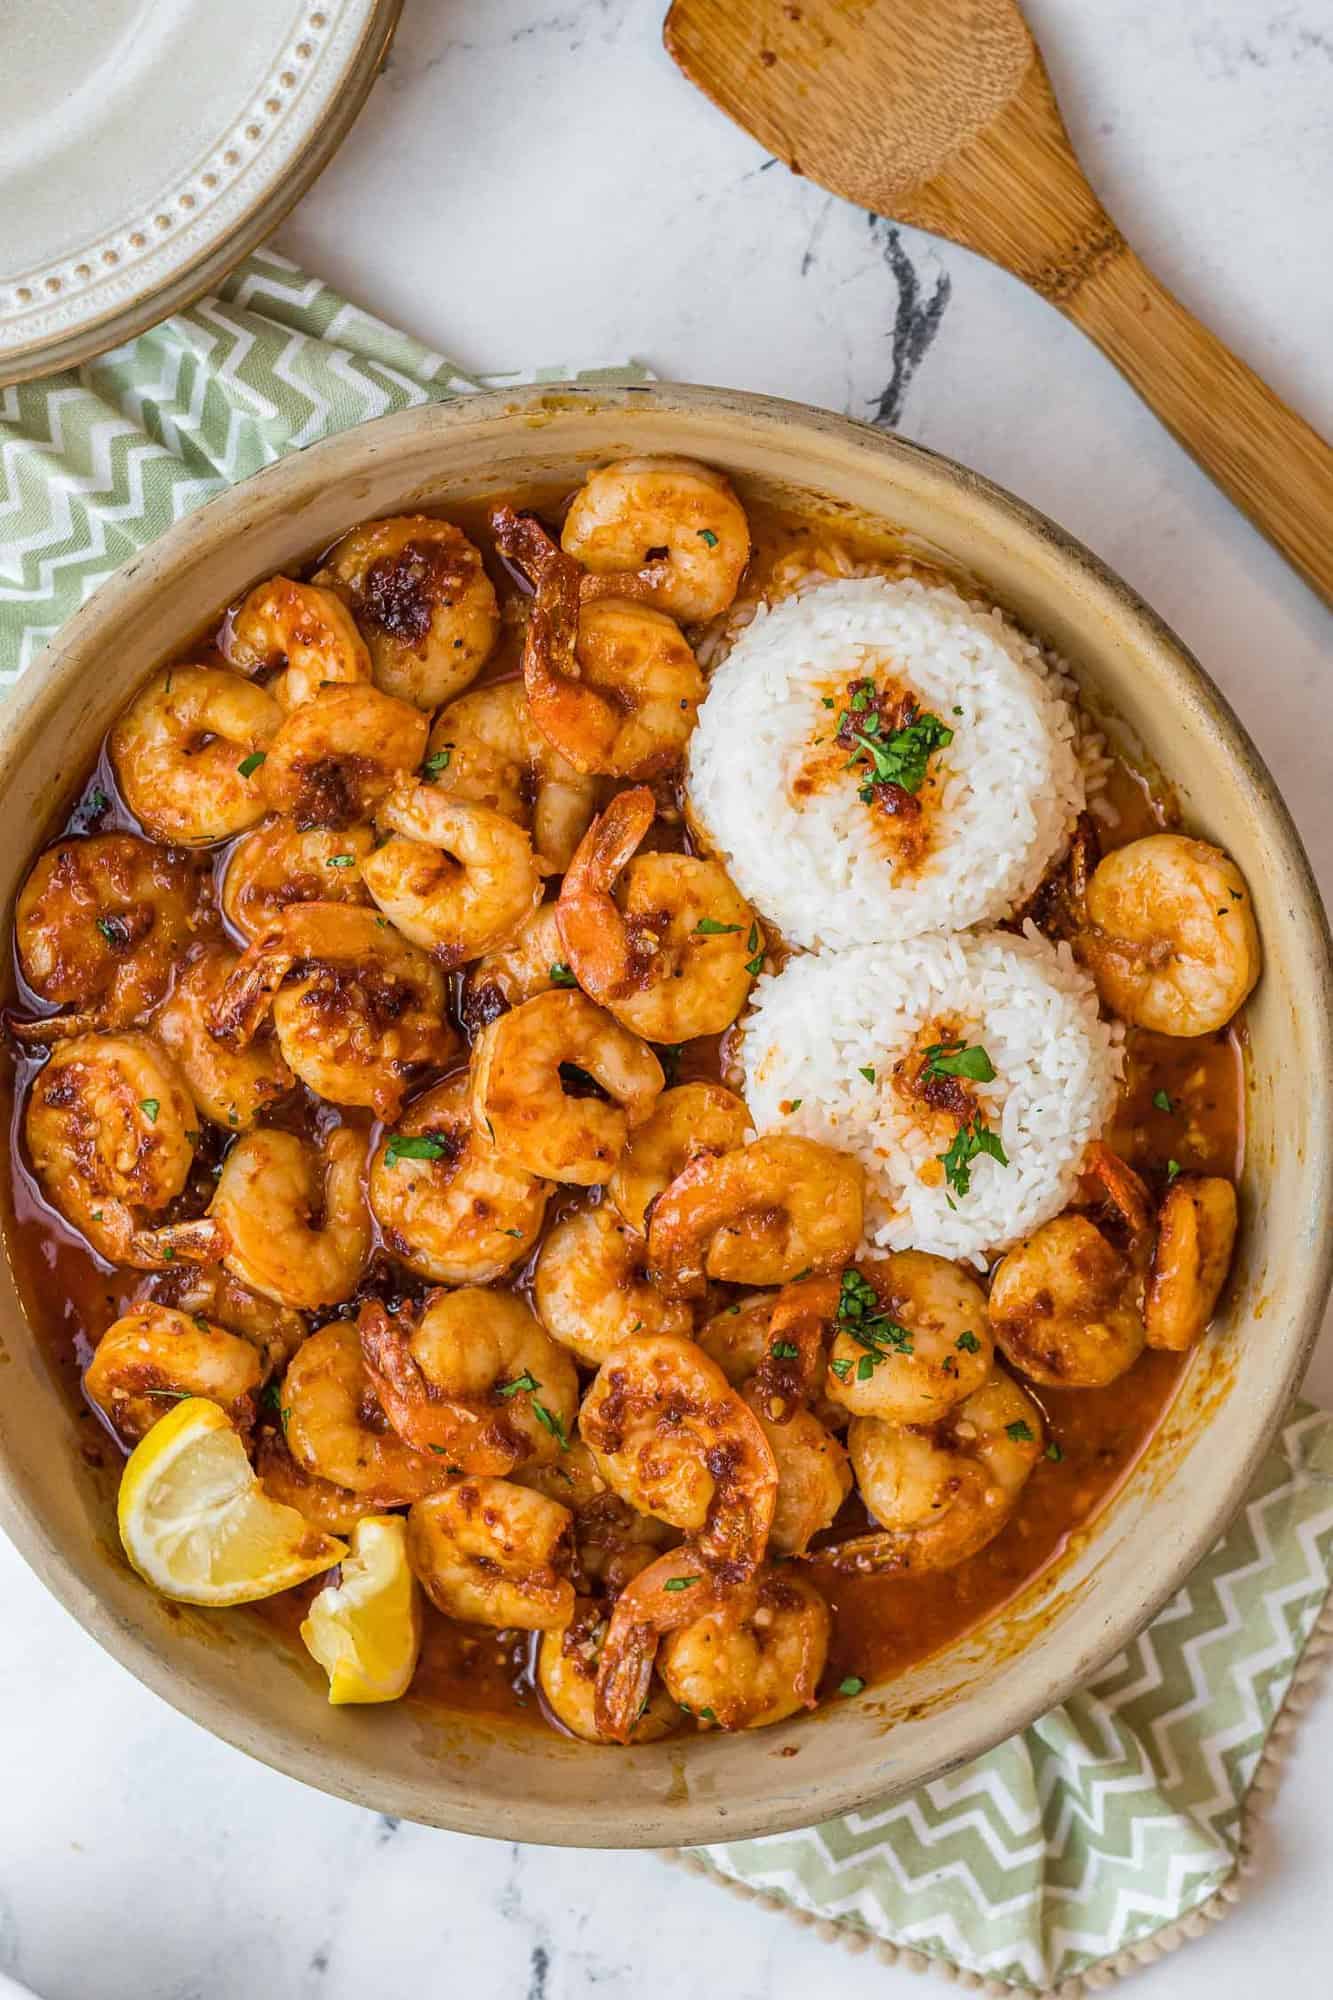 Overhead view of shrimp, rice, and a reddish brown sauce.